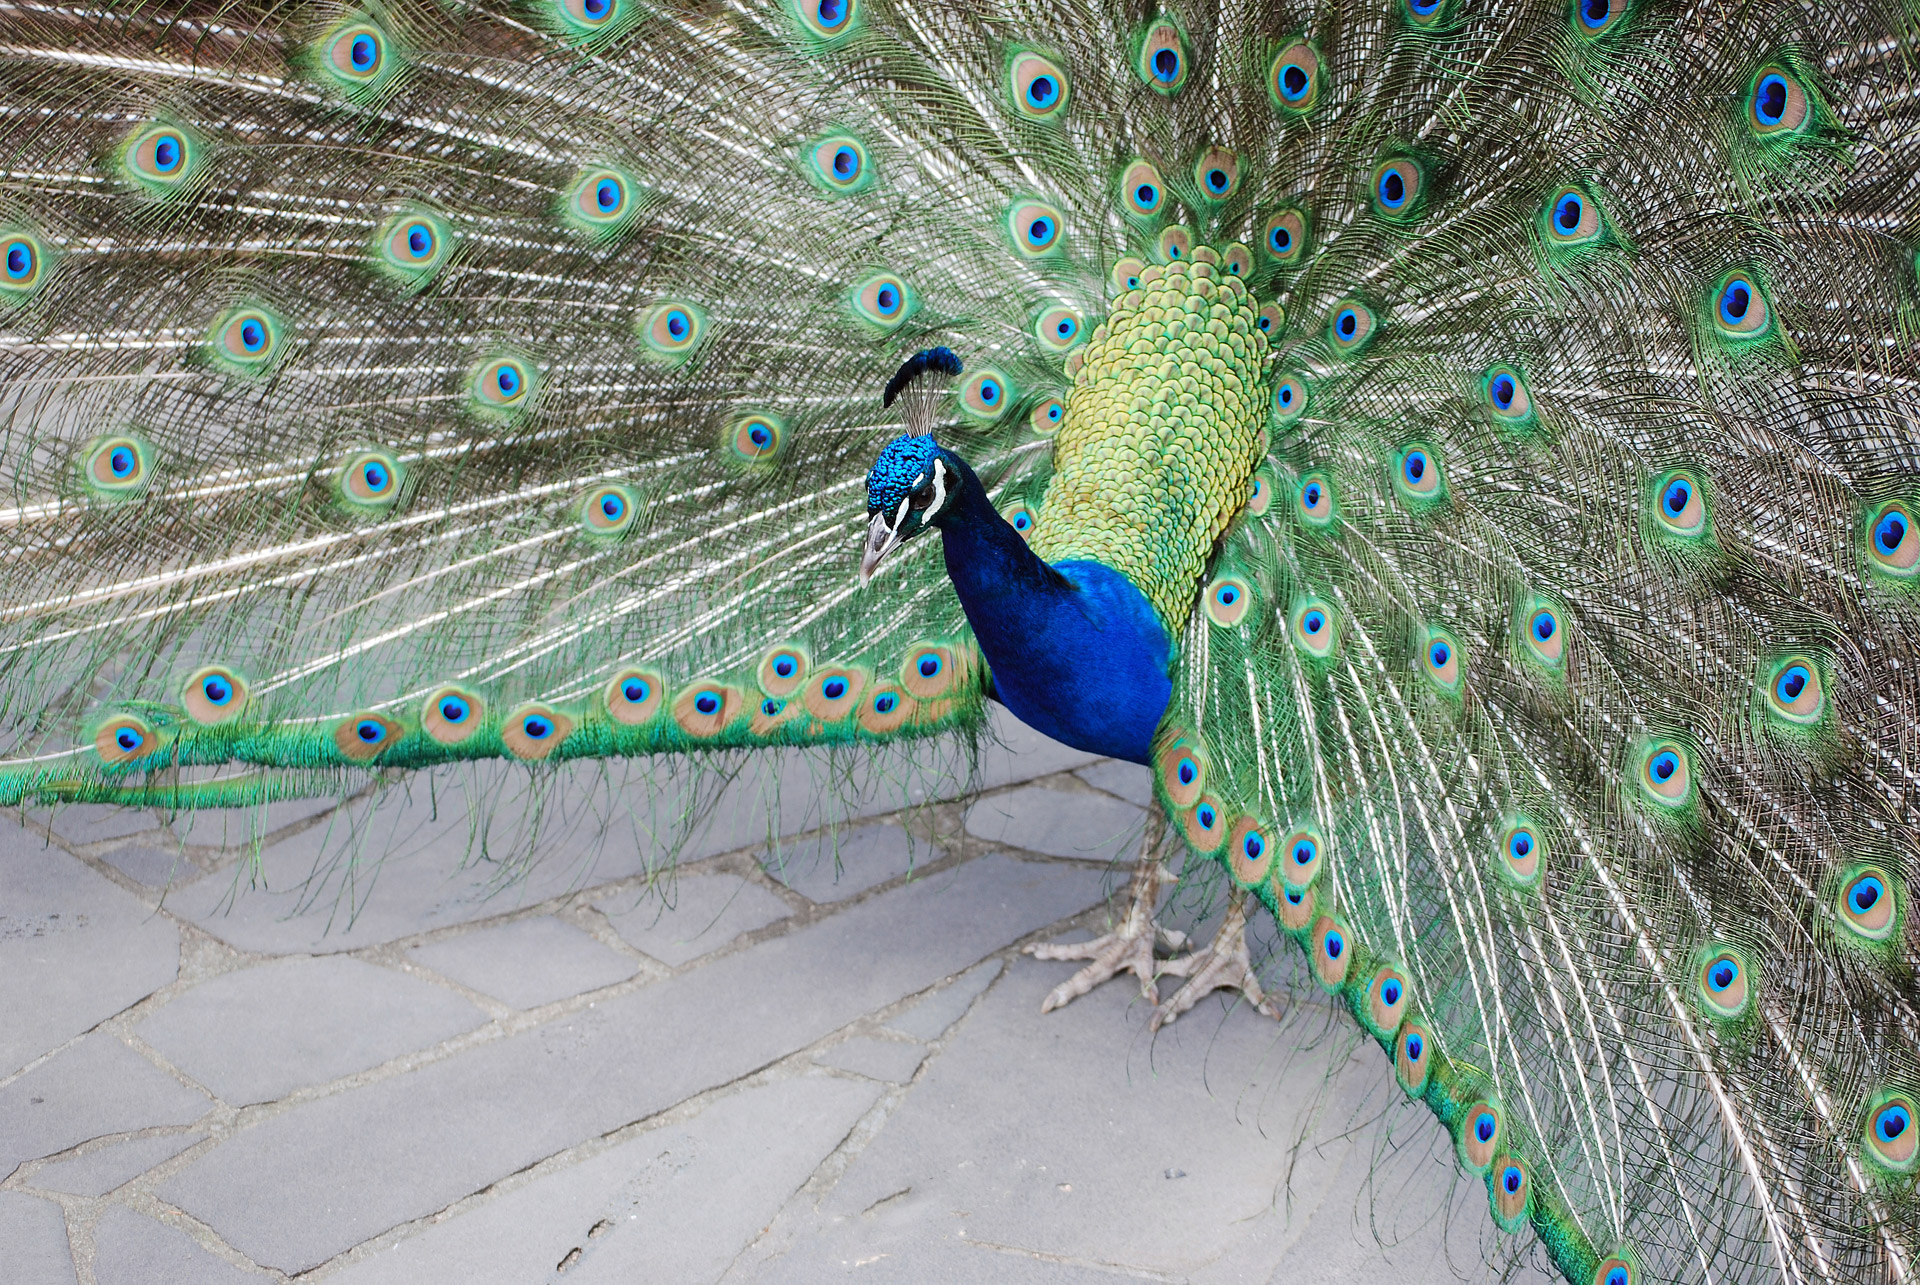 Peacock showing feathers Melbourne Australia